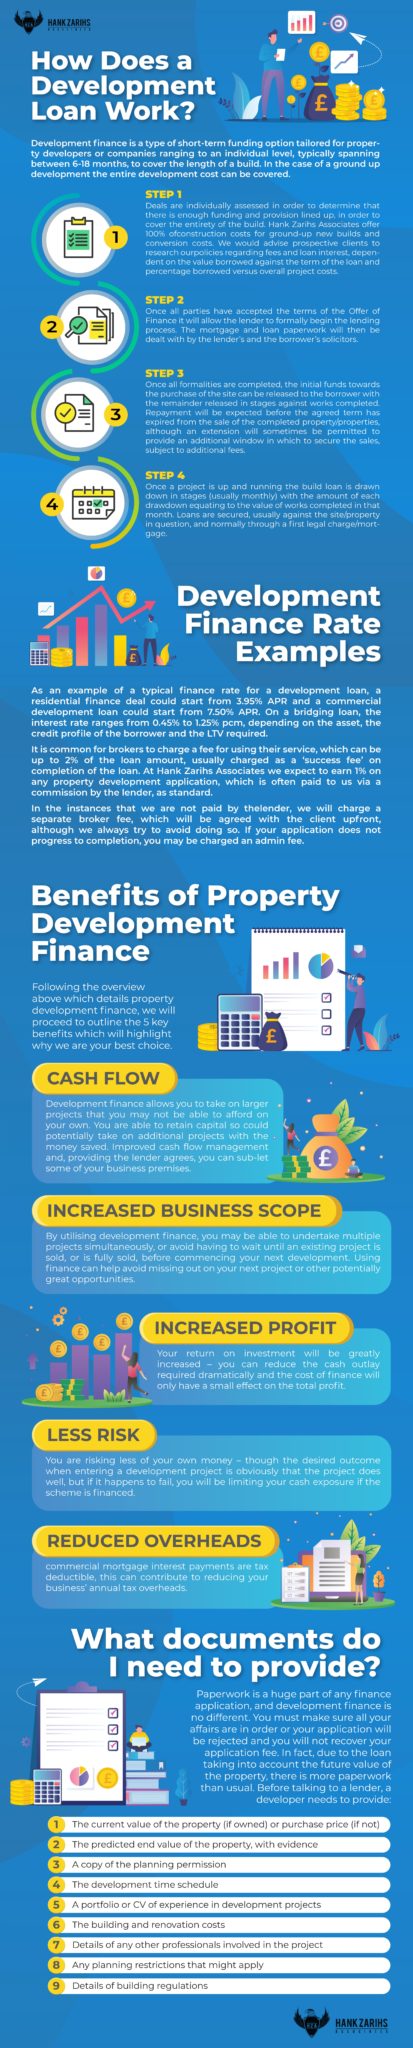 how does development finance work infographic